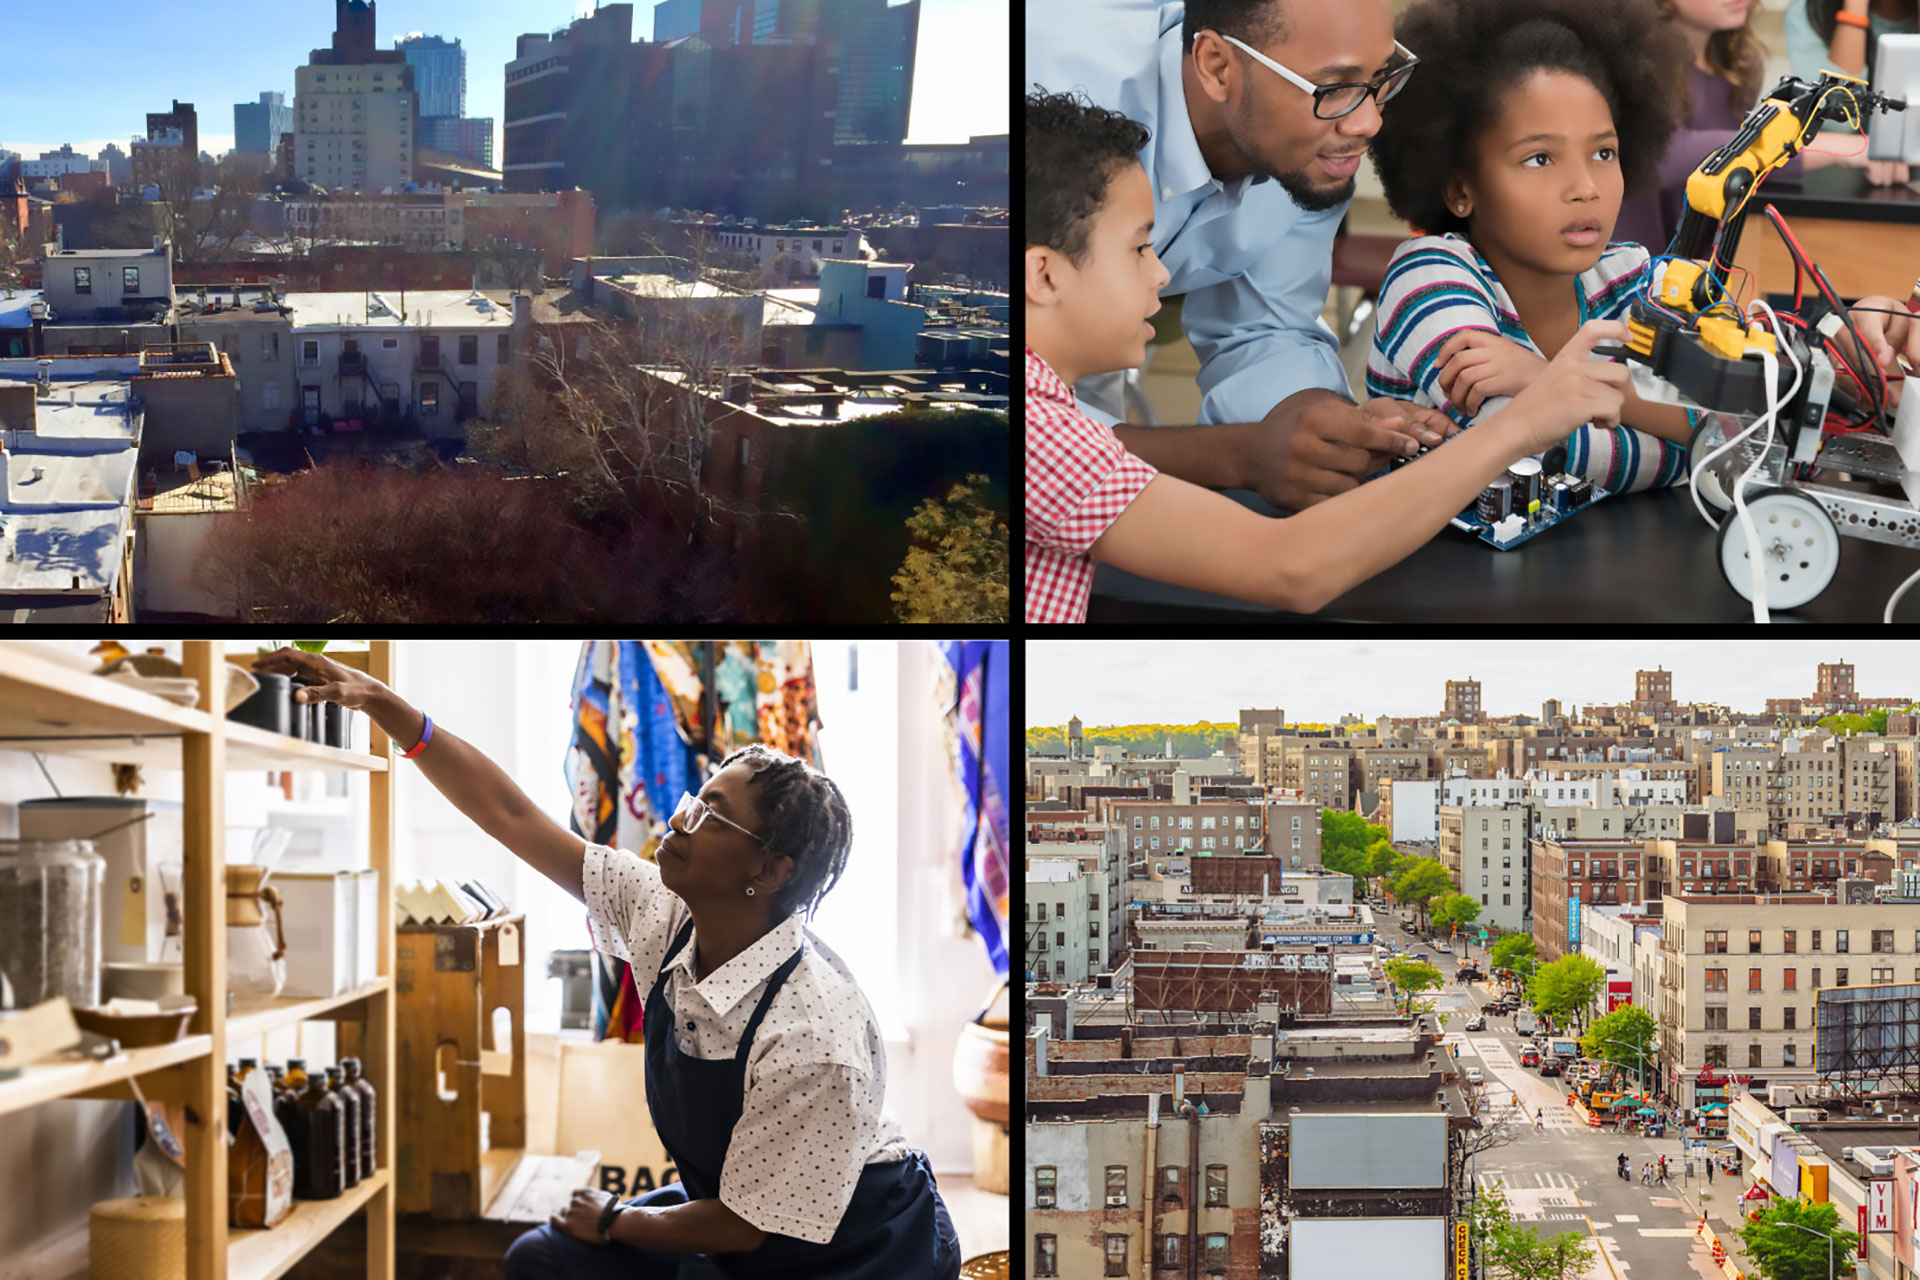 A collage of pictures showcasing New York city from housing, business district, to a teacher helping young students learn robotics, and a shopkeeper stocking shevels.